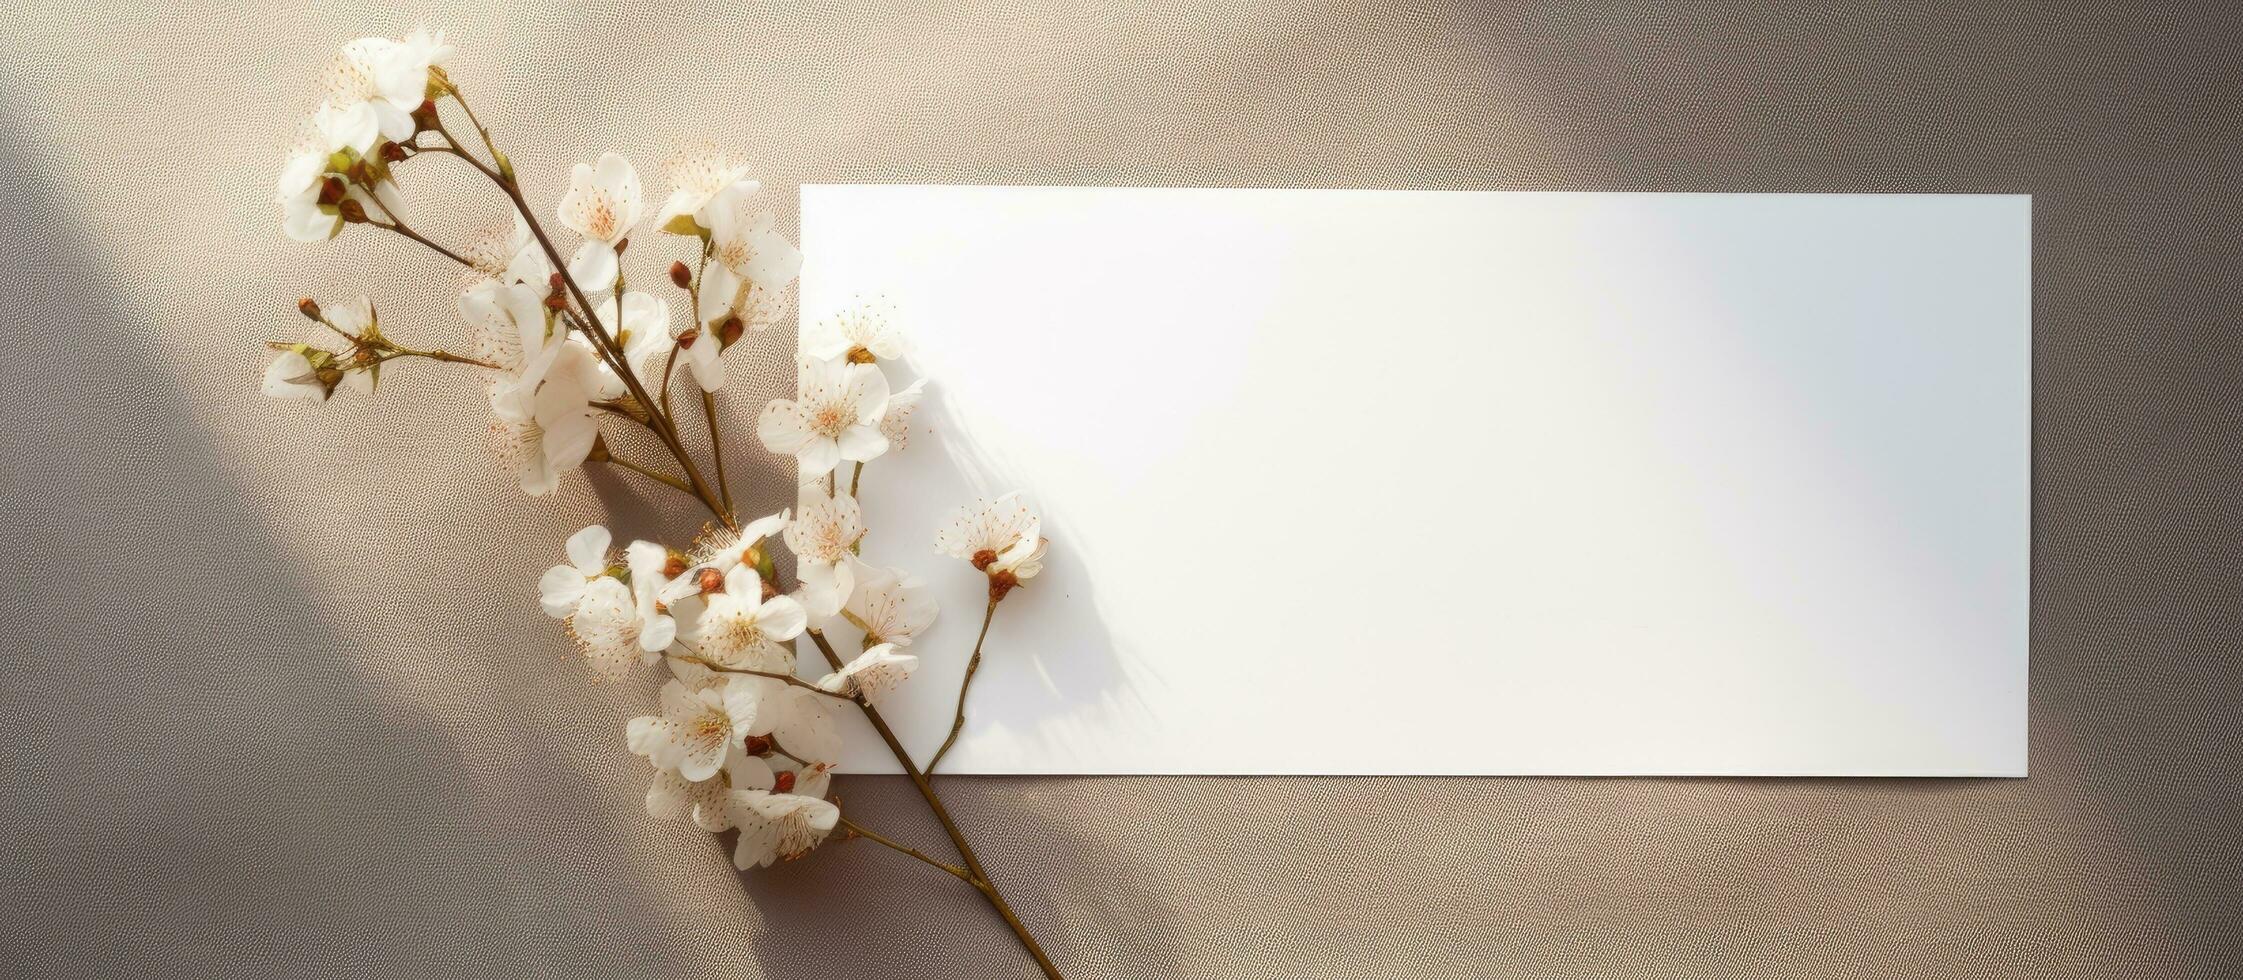 Top view of a minimalistic empty canvas paper or card with space for text and a flower twig, featuring photo